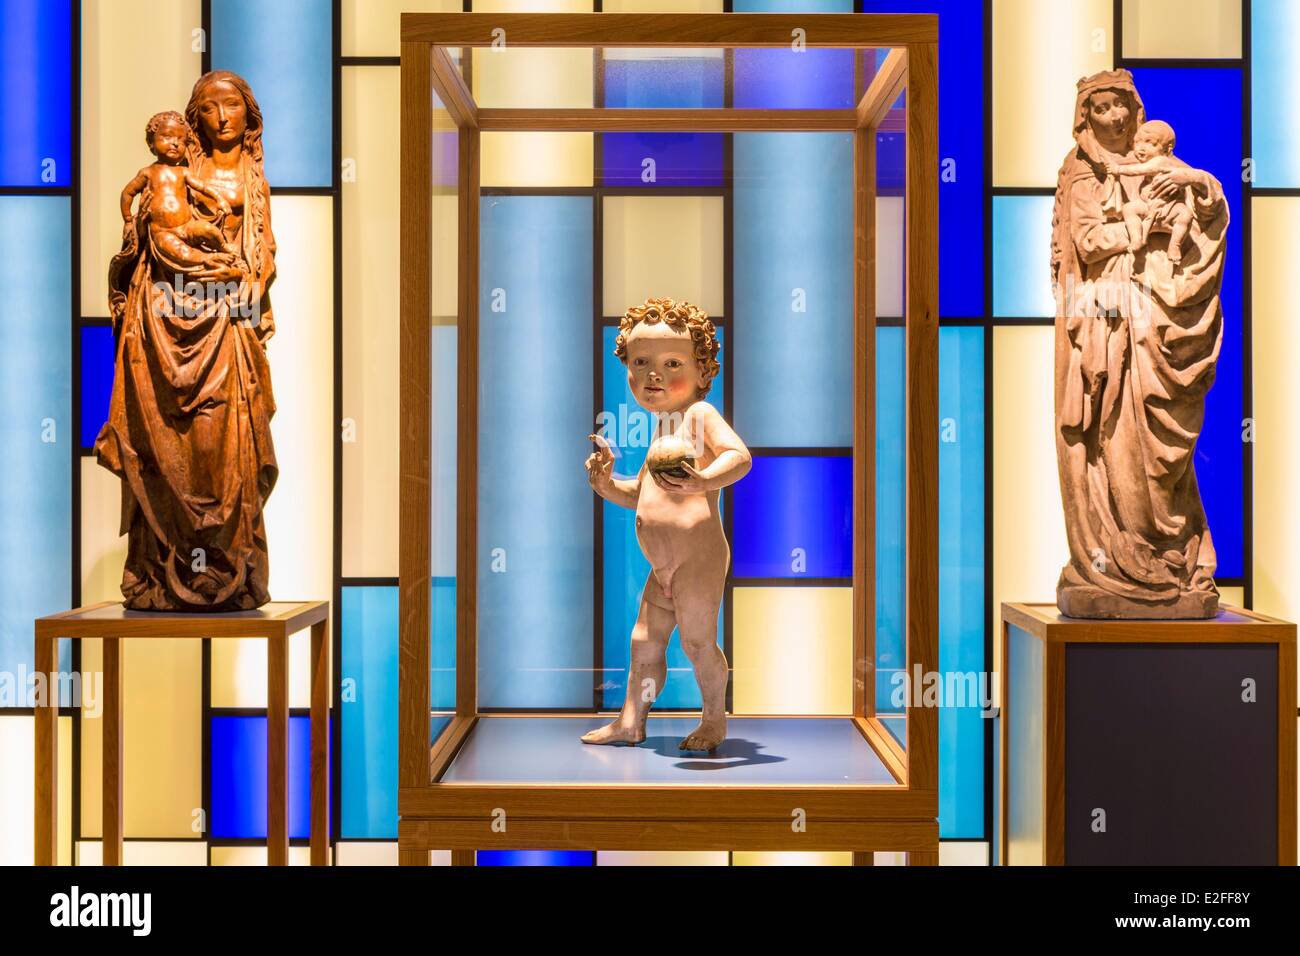 Germany, Hamburg, Museum fur Kunst und Gewerbe (MKG), Museum of Arts and Crafts, religious sculptures dating from the 1500s Stock Photo